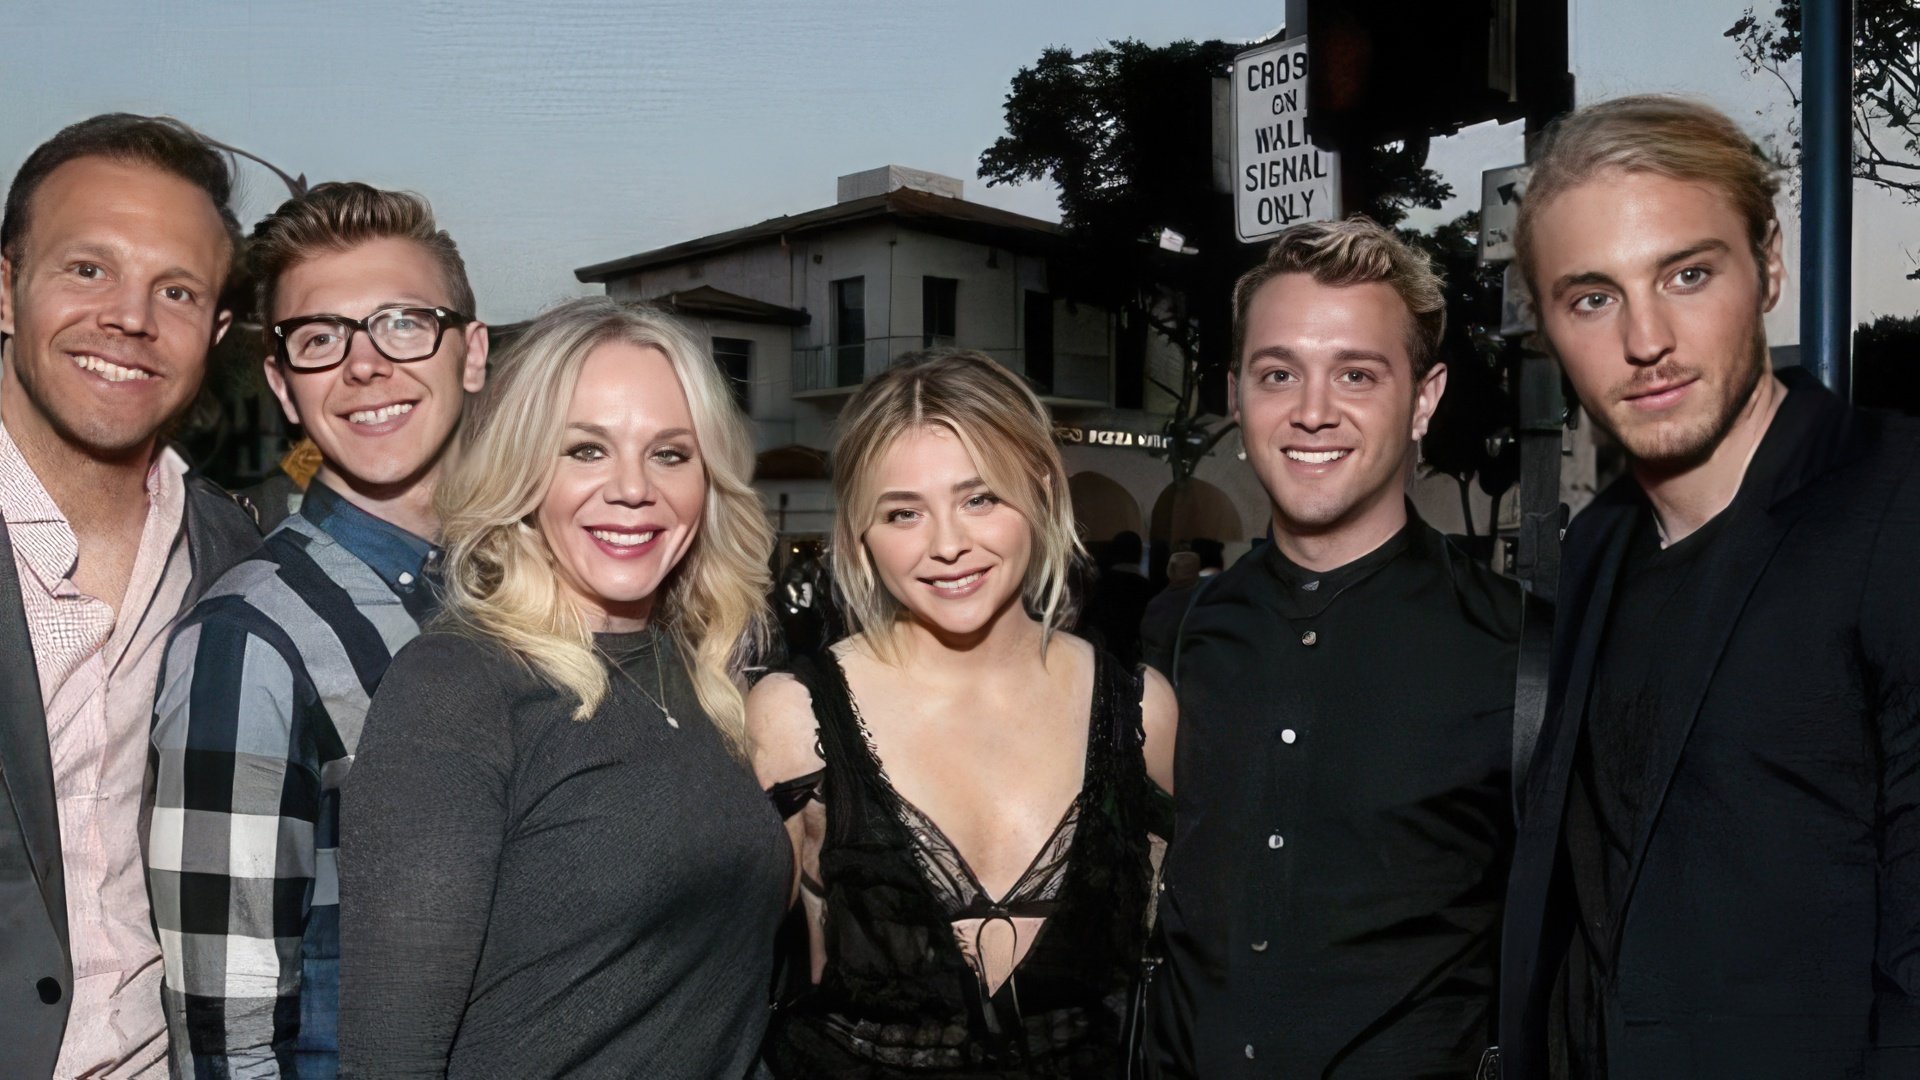  Chloë Grace Moretz with her Mom and brothers